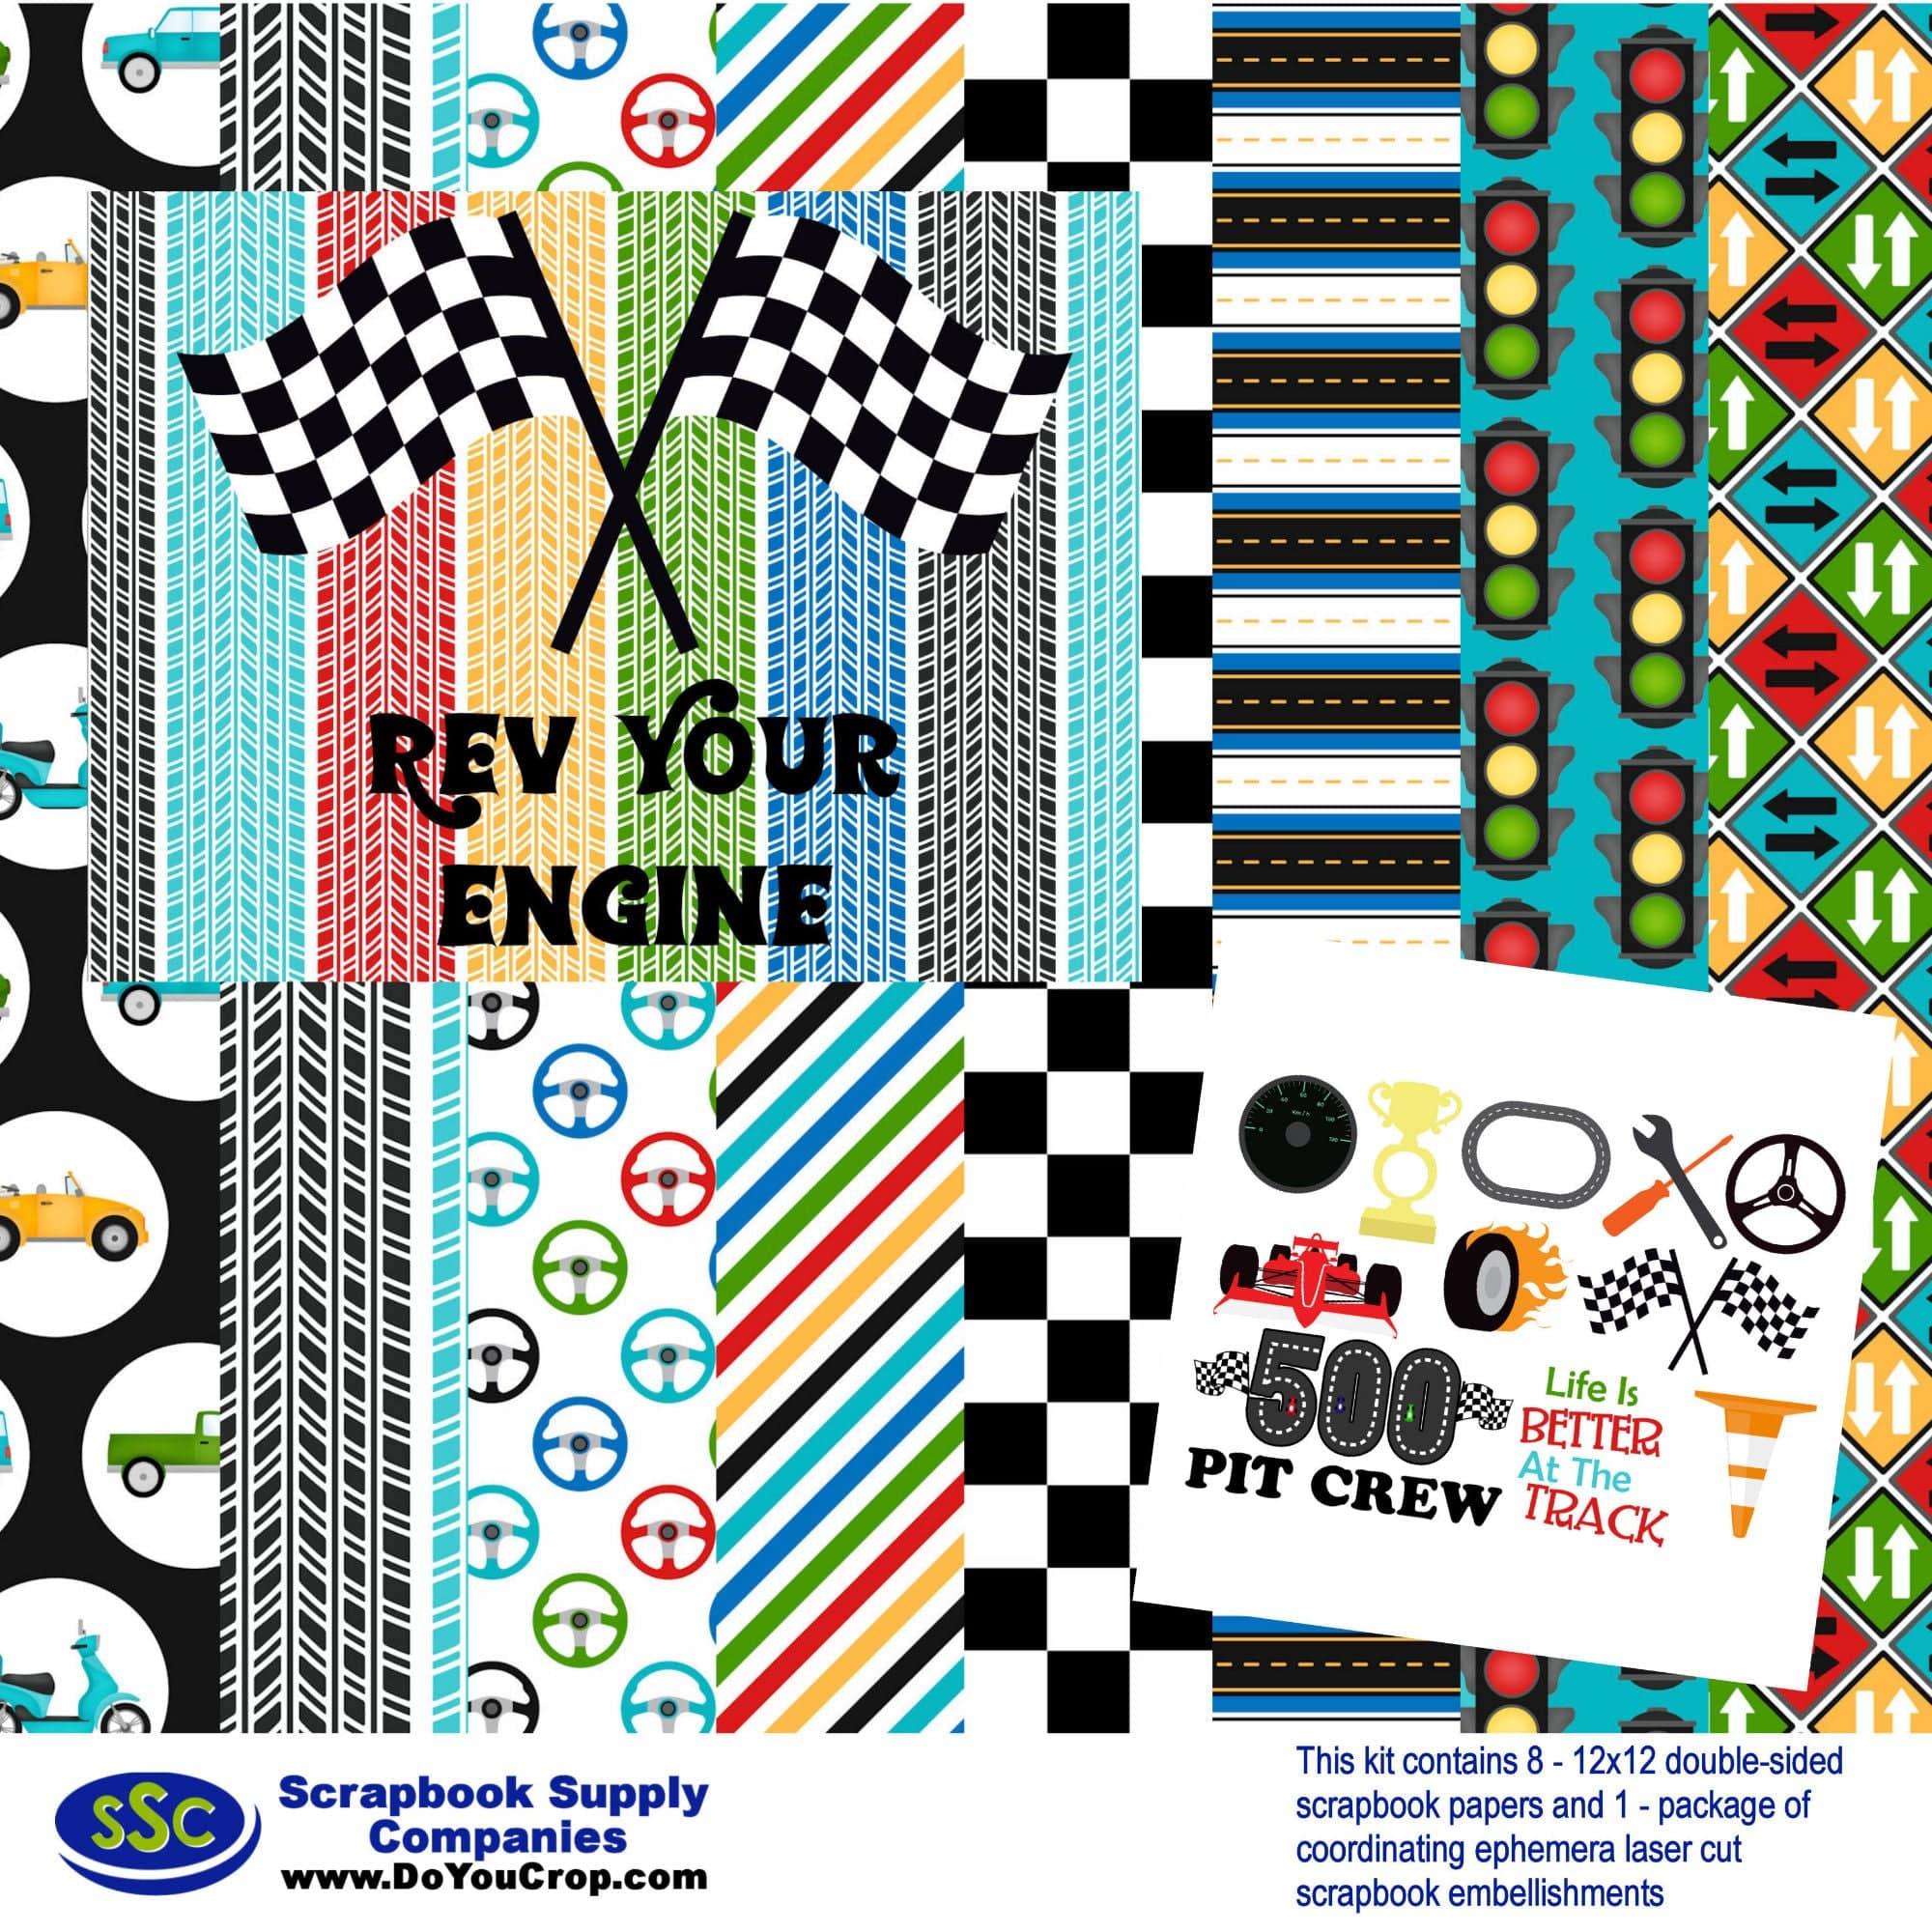 Rev Your Engine 12 x 12 Scrapbook Collection Kit by SSC Designs - Scrapbook Supply Companies